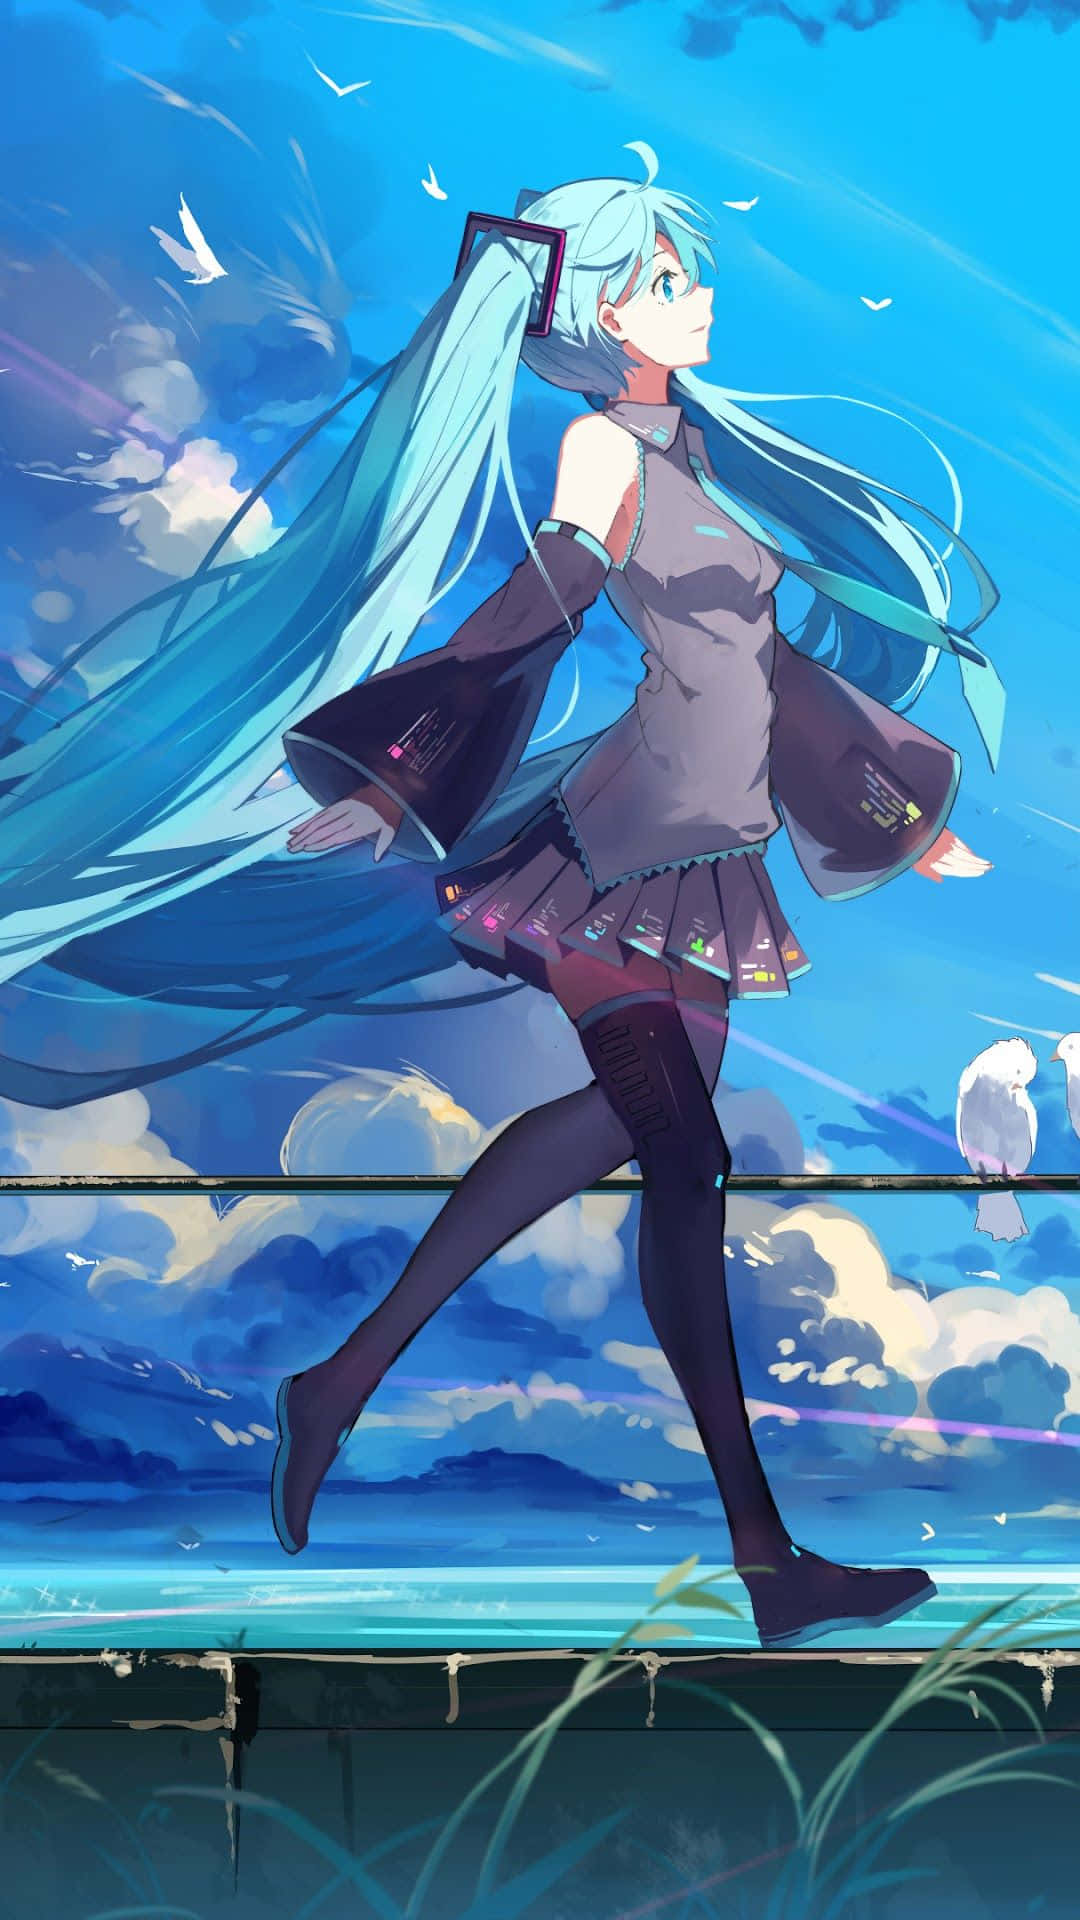 "Hatsune Miku fans rejoice - now with a phone that visually brings your favorite artist to life!" Wallpaper